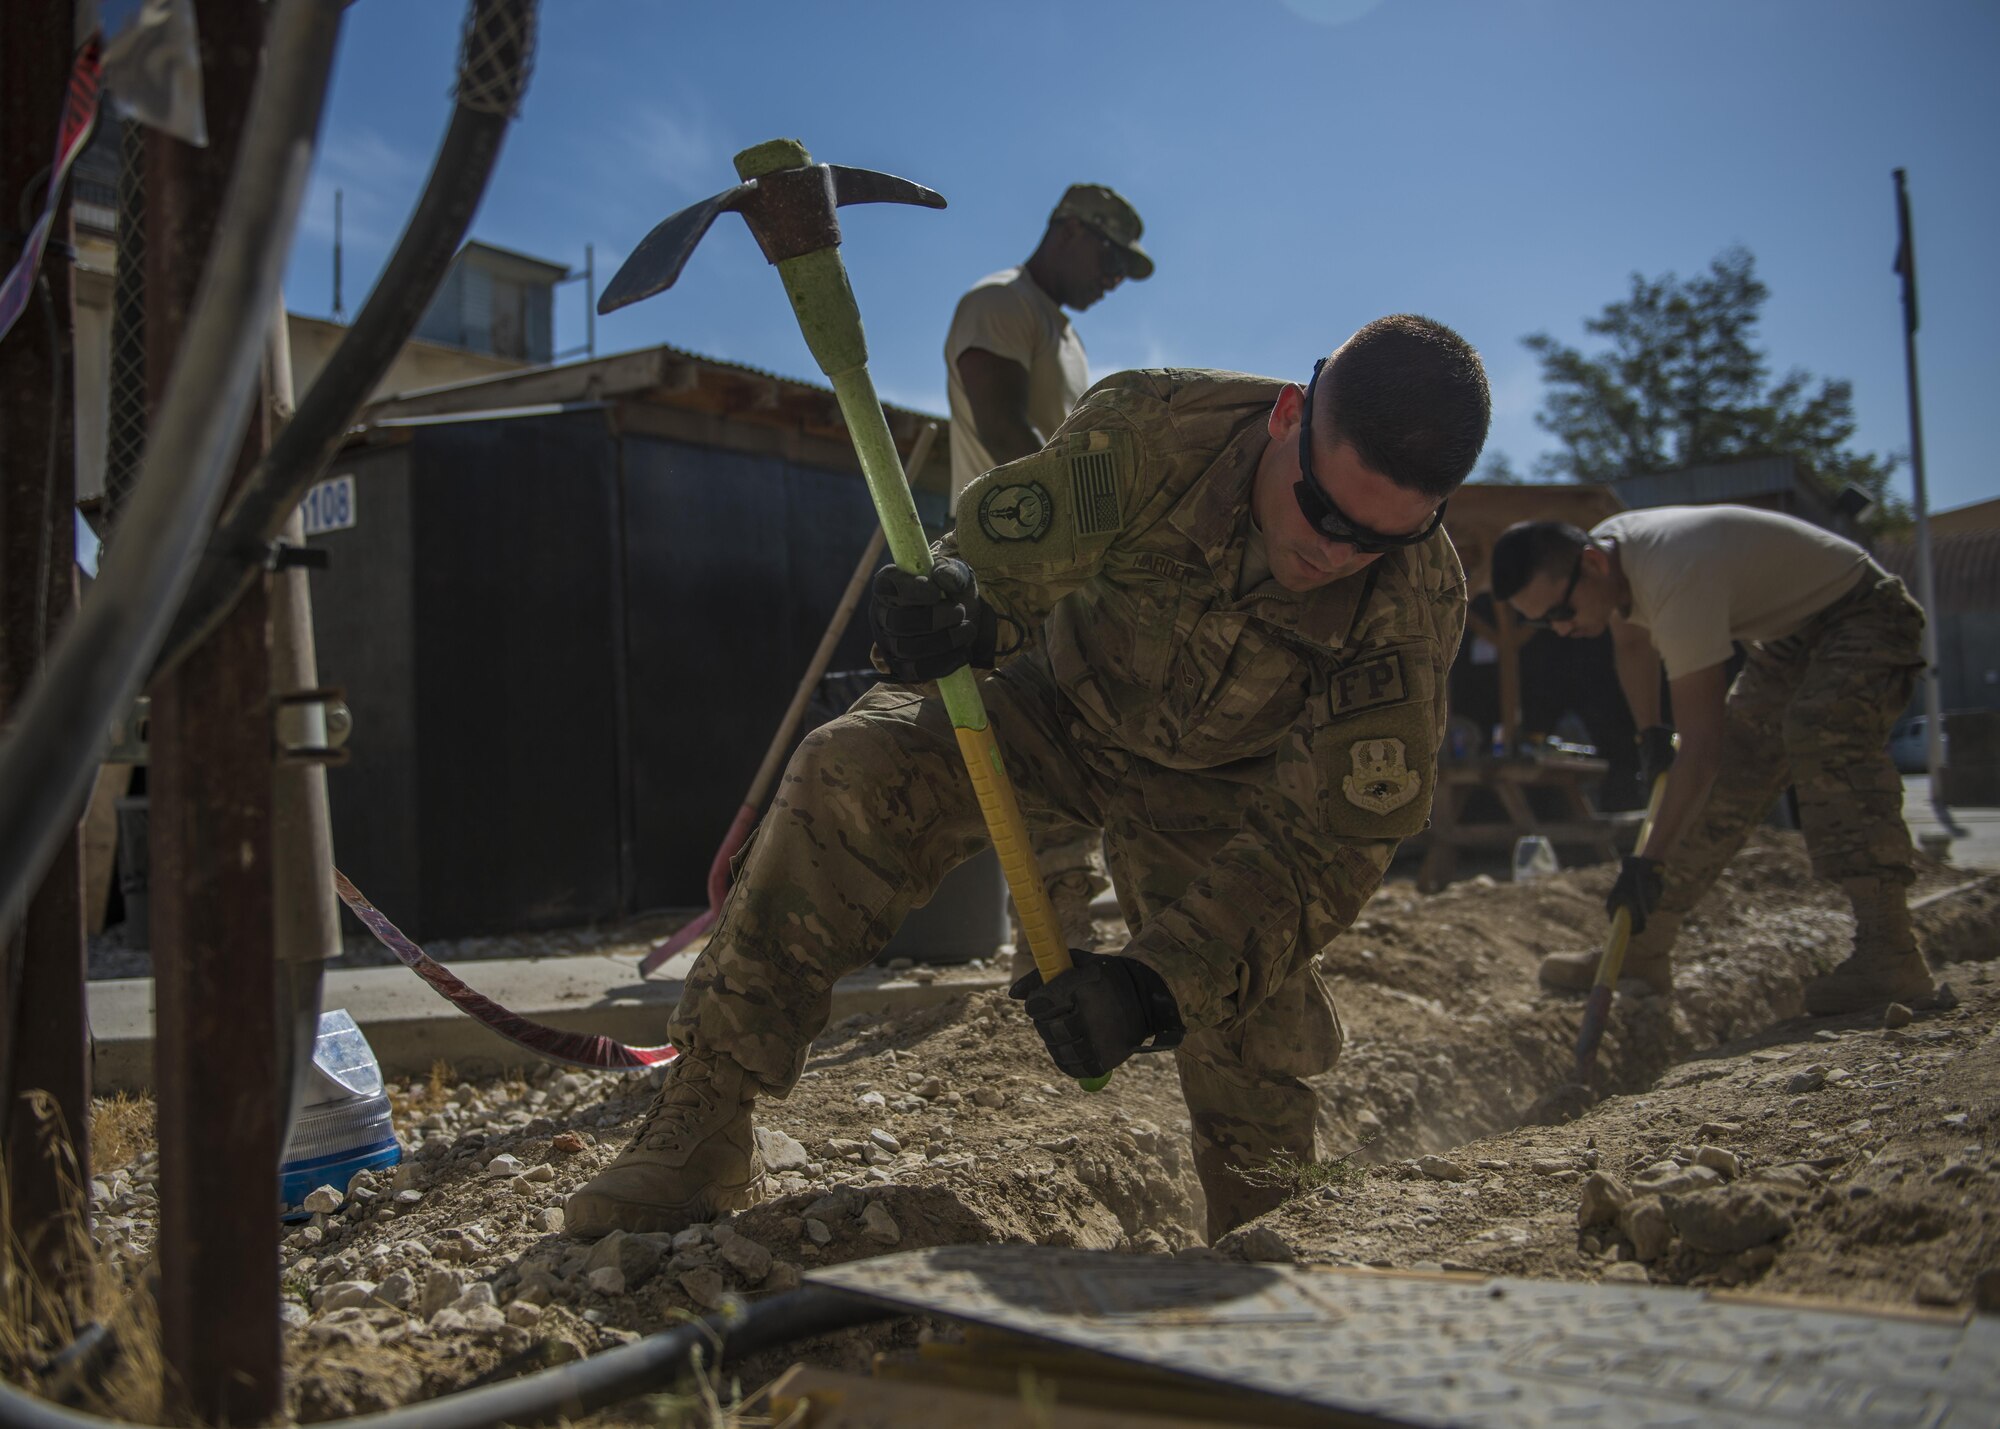 Airmen from the 455th Expeditionary Civil Engineer Squadron run service wire through the ground, Bagram Airfield, Afghanistan, Aug. 31, 2016. Electricians paired with the ECES structures team to renovate and provide electricity to a new Airman’s Ministry Center and Airman’s Attic. (U.S. Air Force photo by Senior Airman Justyn M. Freeman)